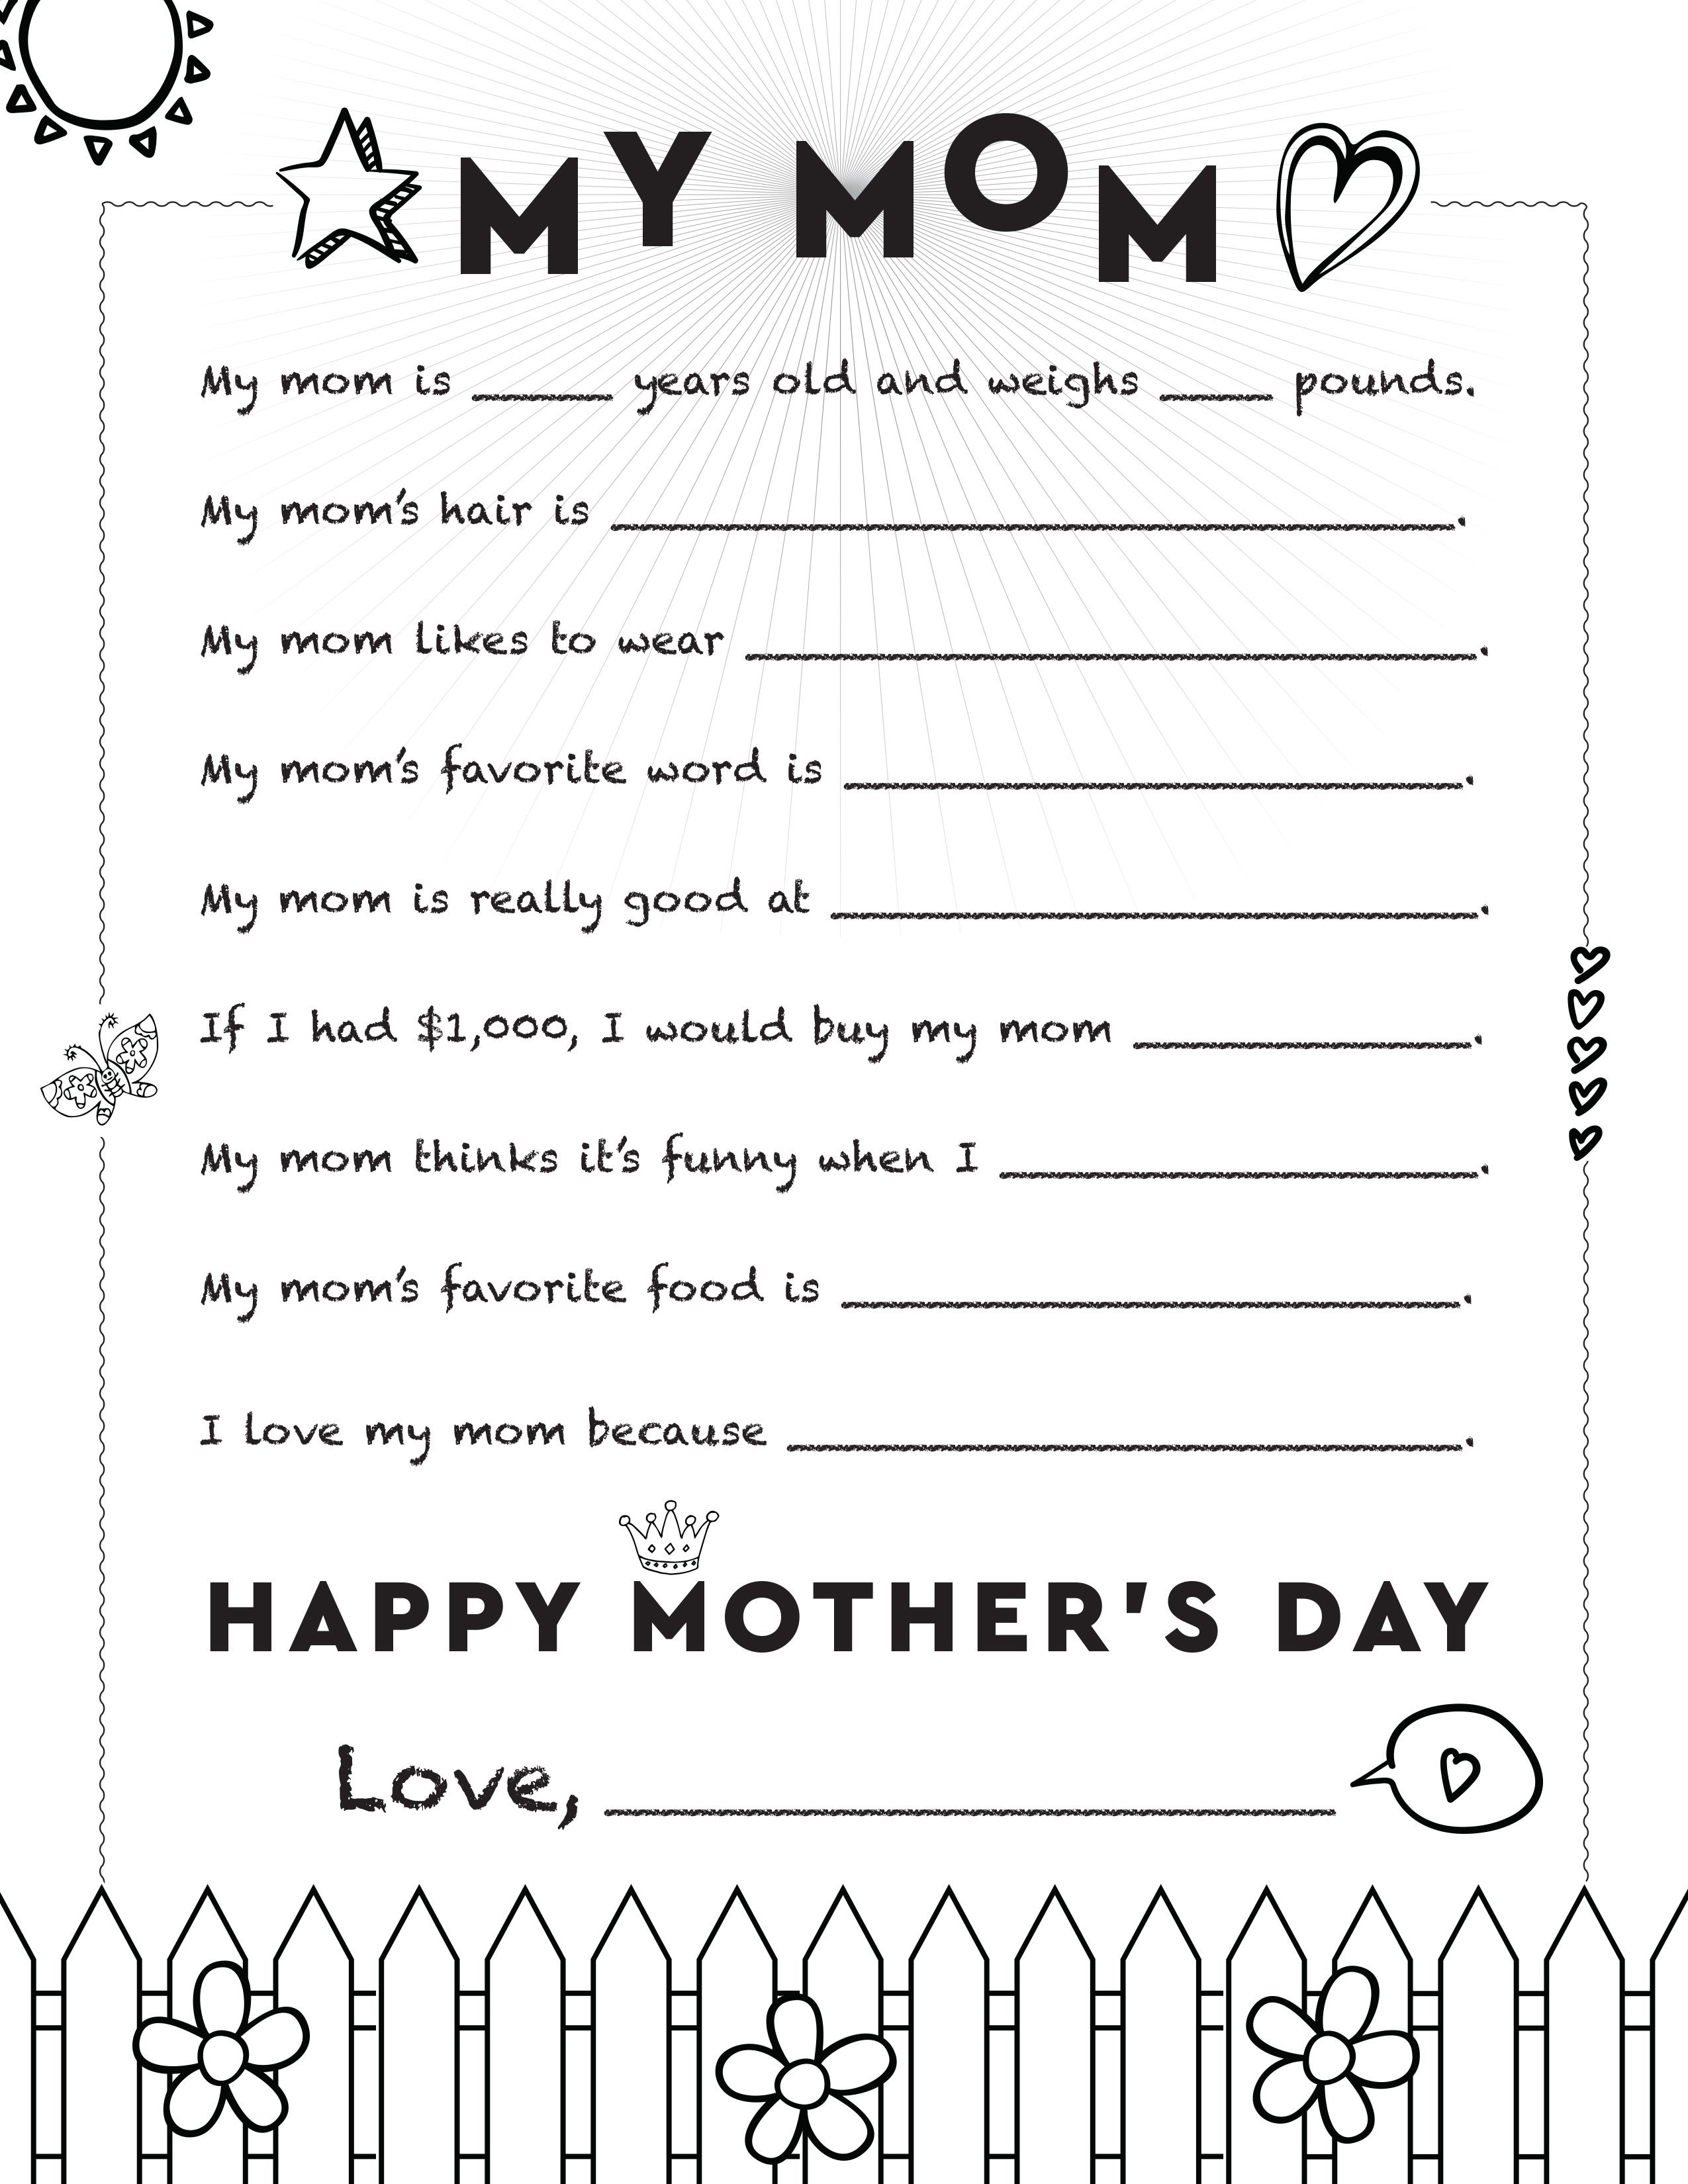 25 Mothers Day 2020 Cards Free Printable Mother S Day Cards